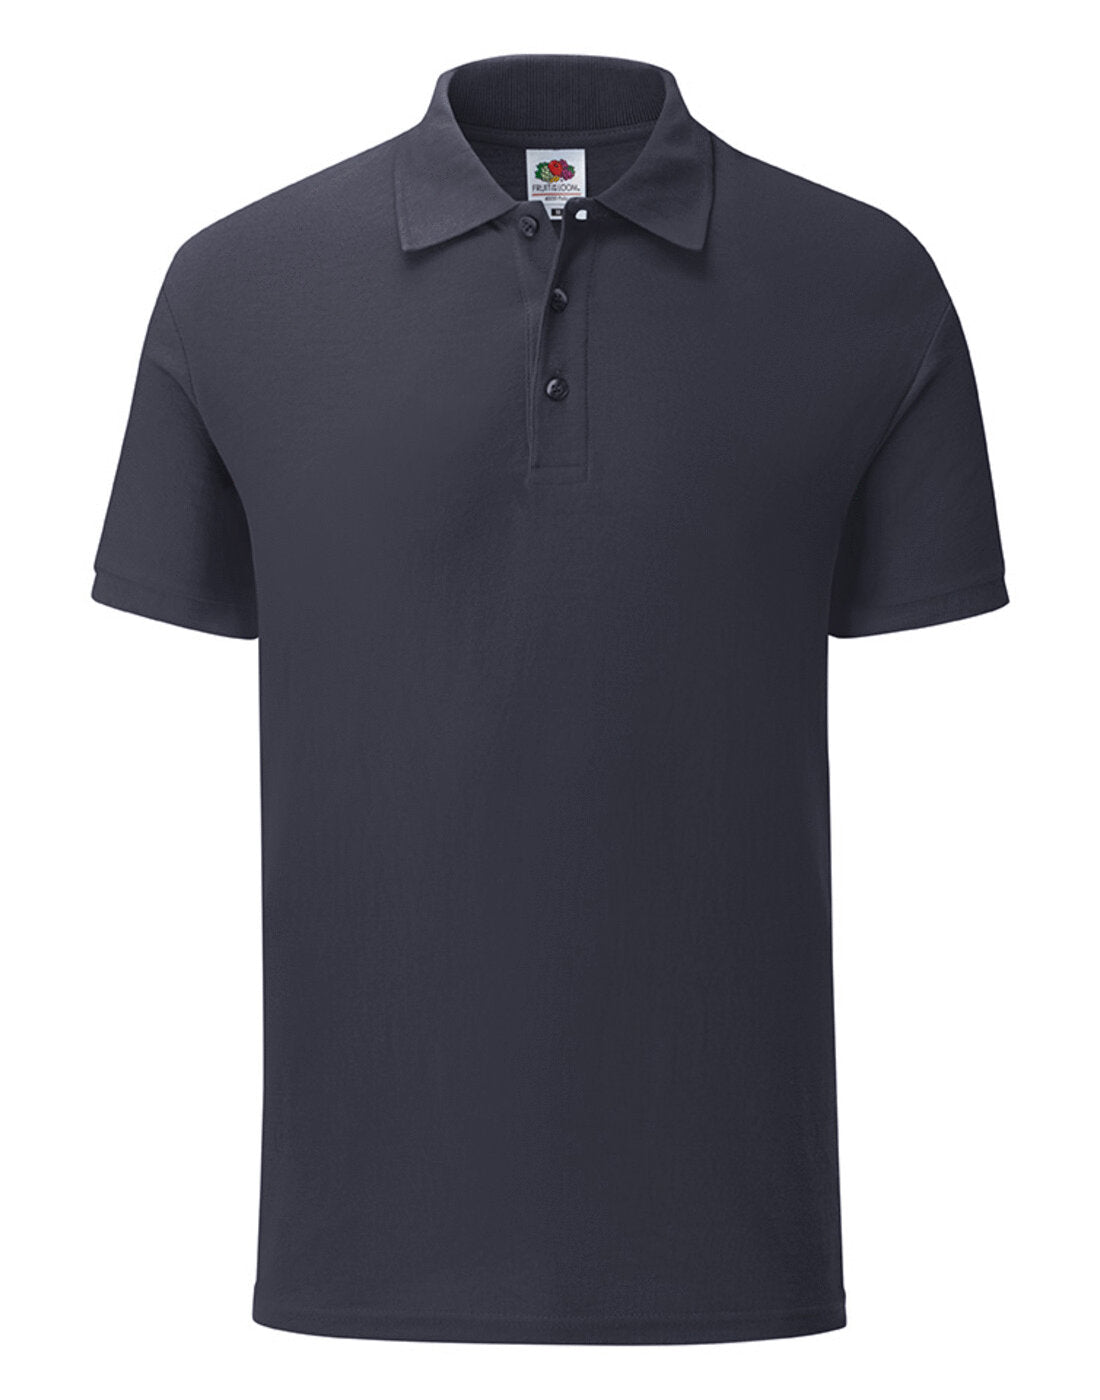 Fruit of the Loom 65/35 Tailored Fit Polo - Dark Navy